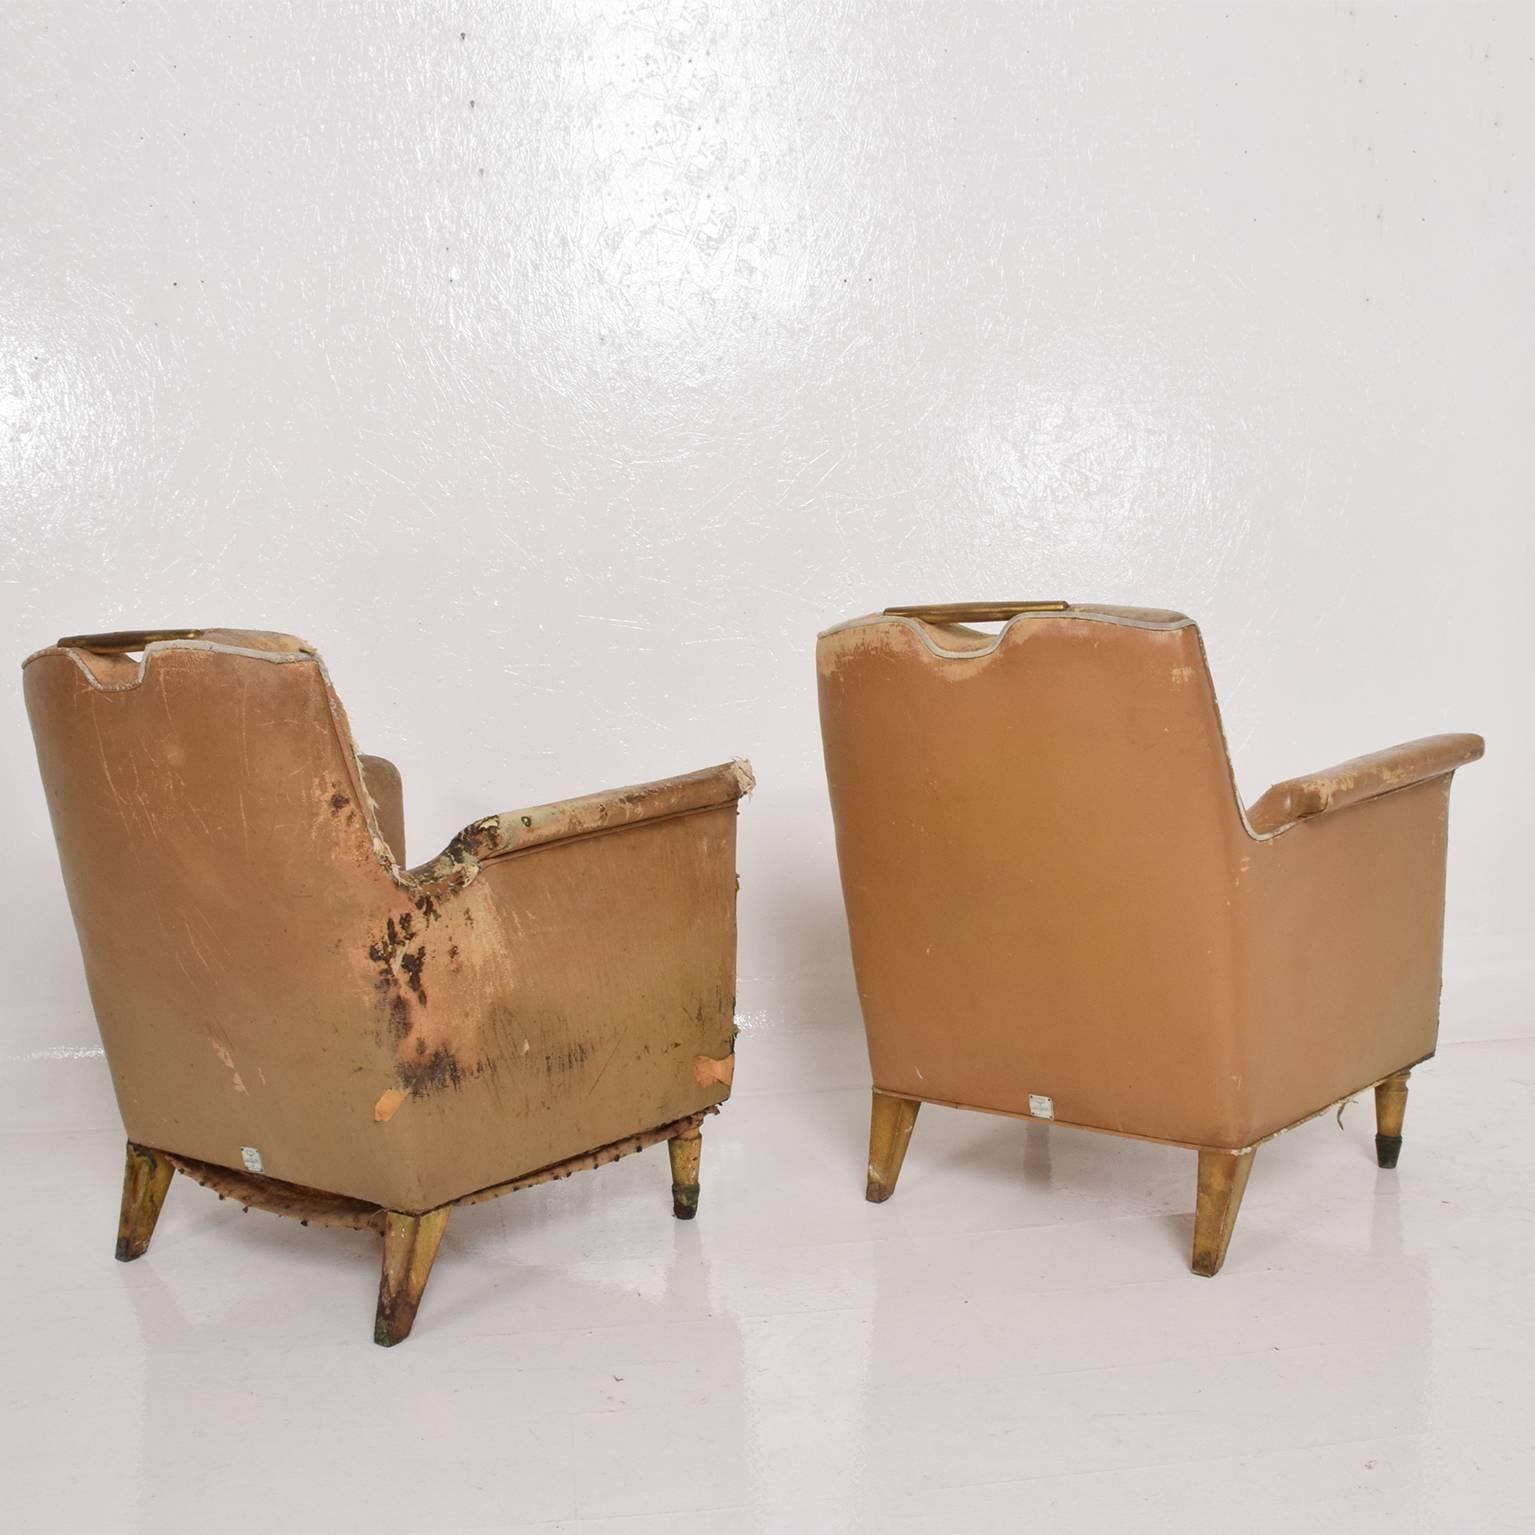 Mid-20th Century Set of Two Octavio Vidales Distressed Leather Chairs for Muebles Johrvy